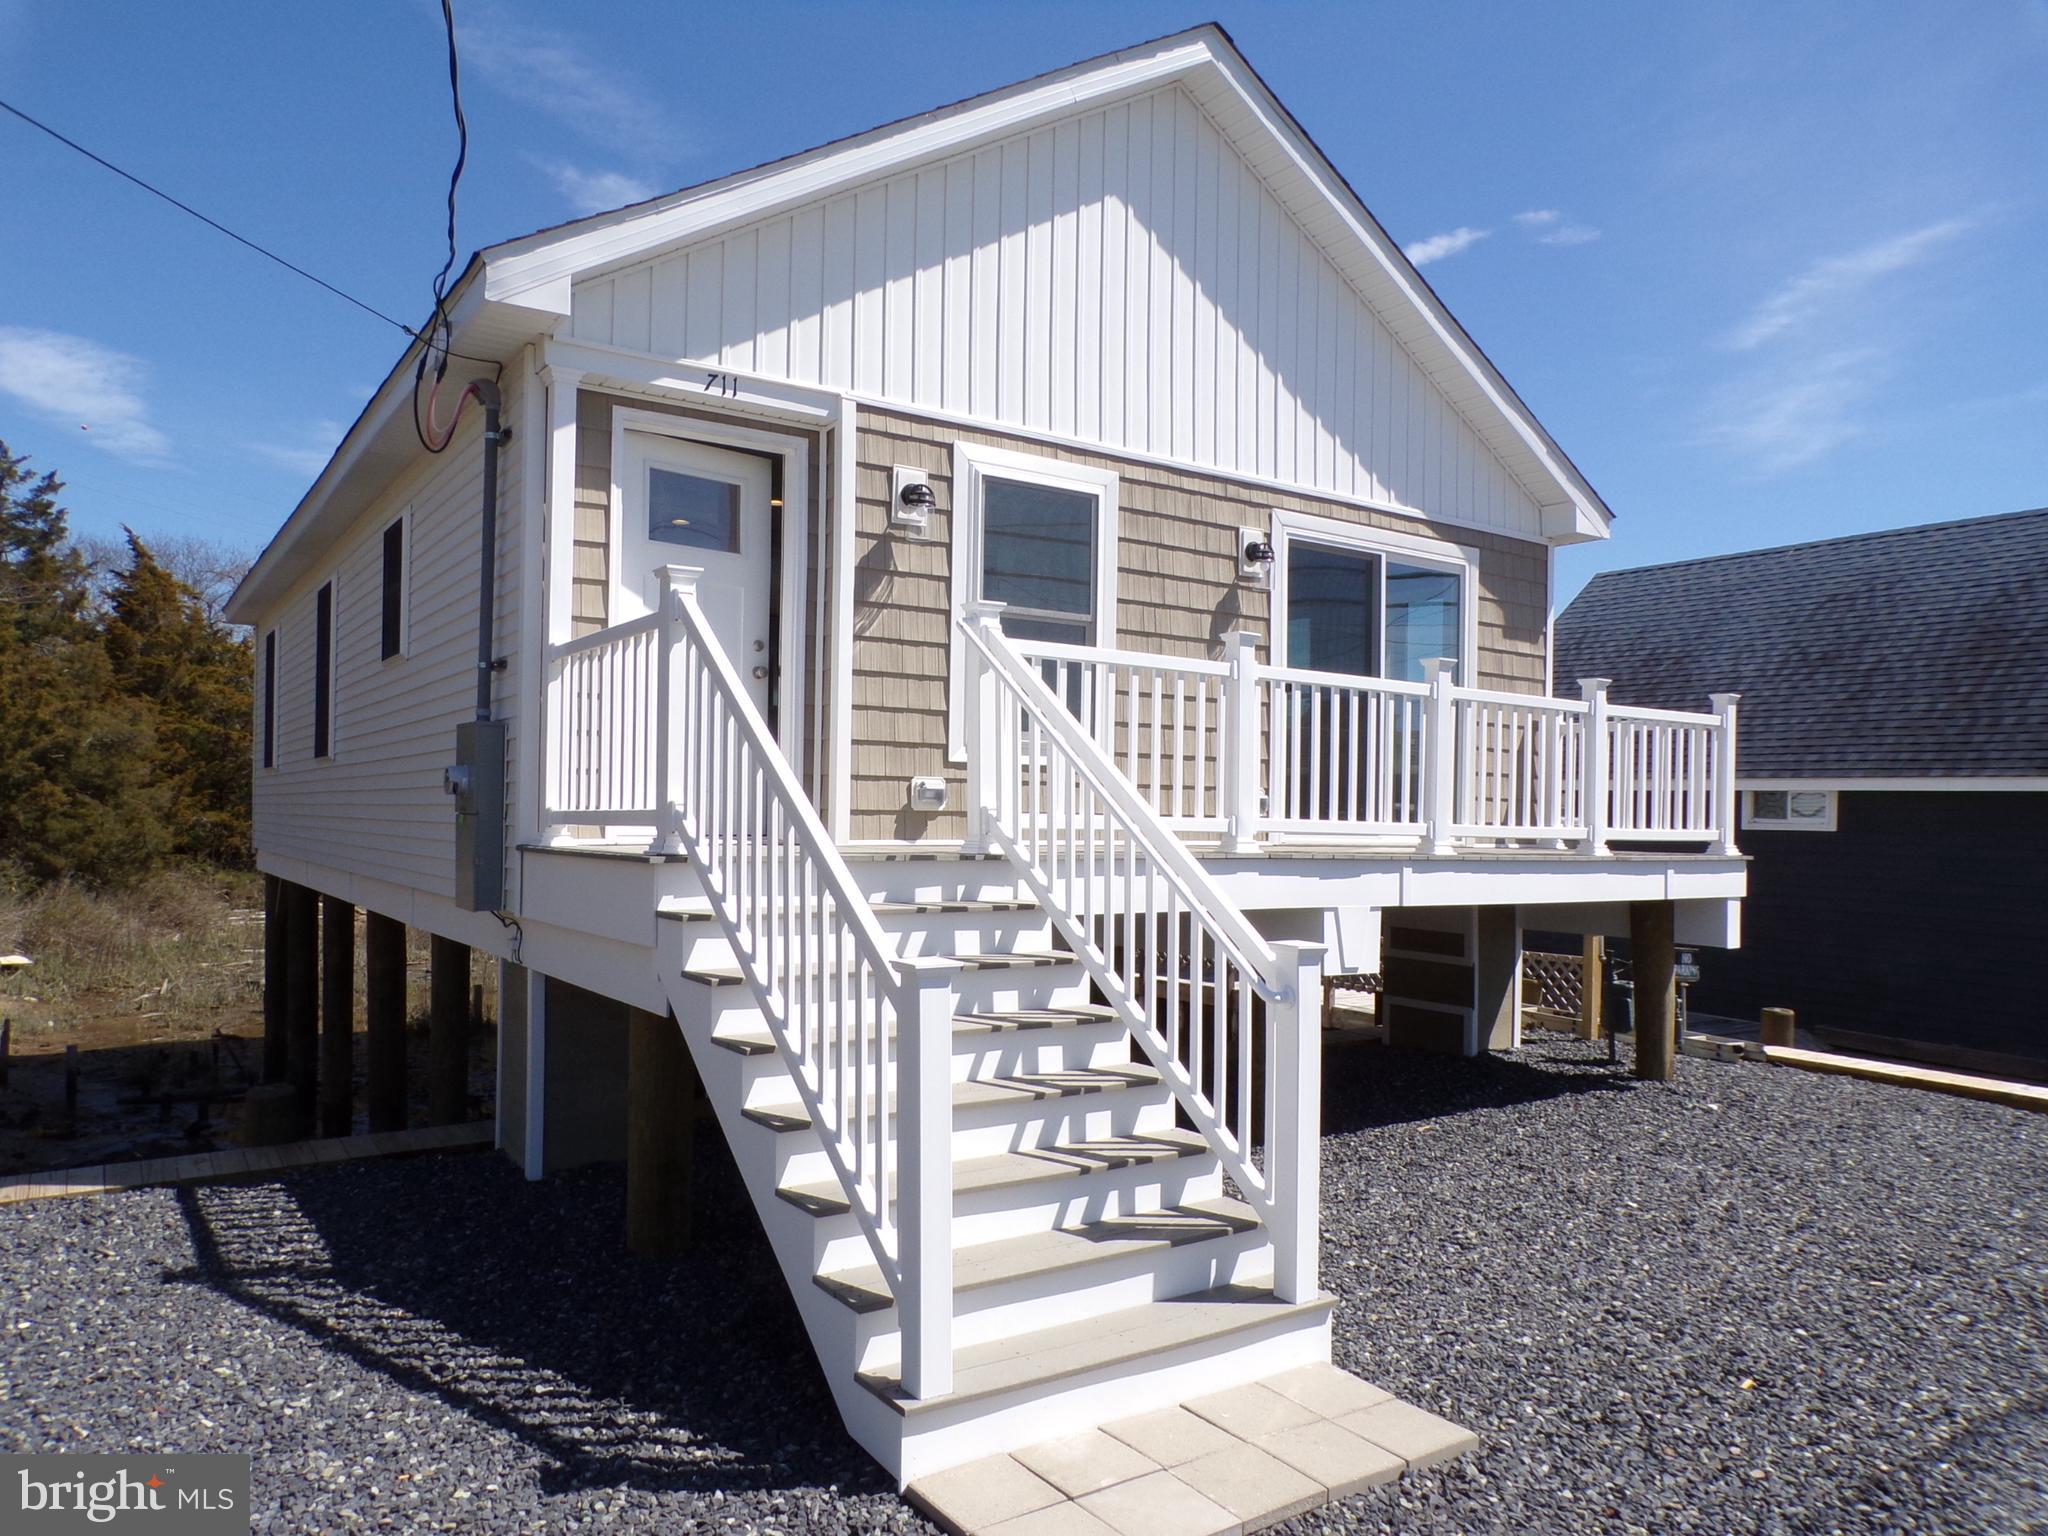 a front view of a house with deck and deck